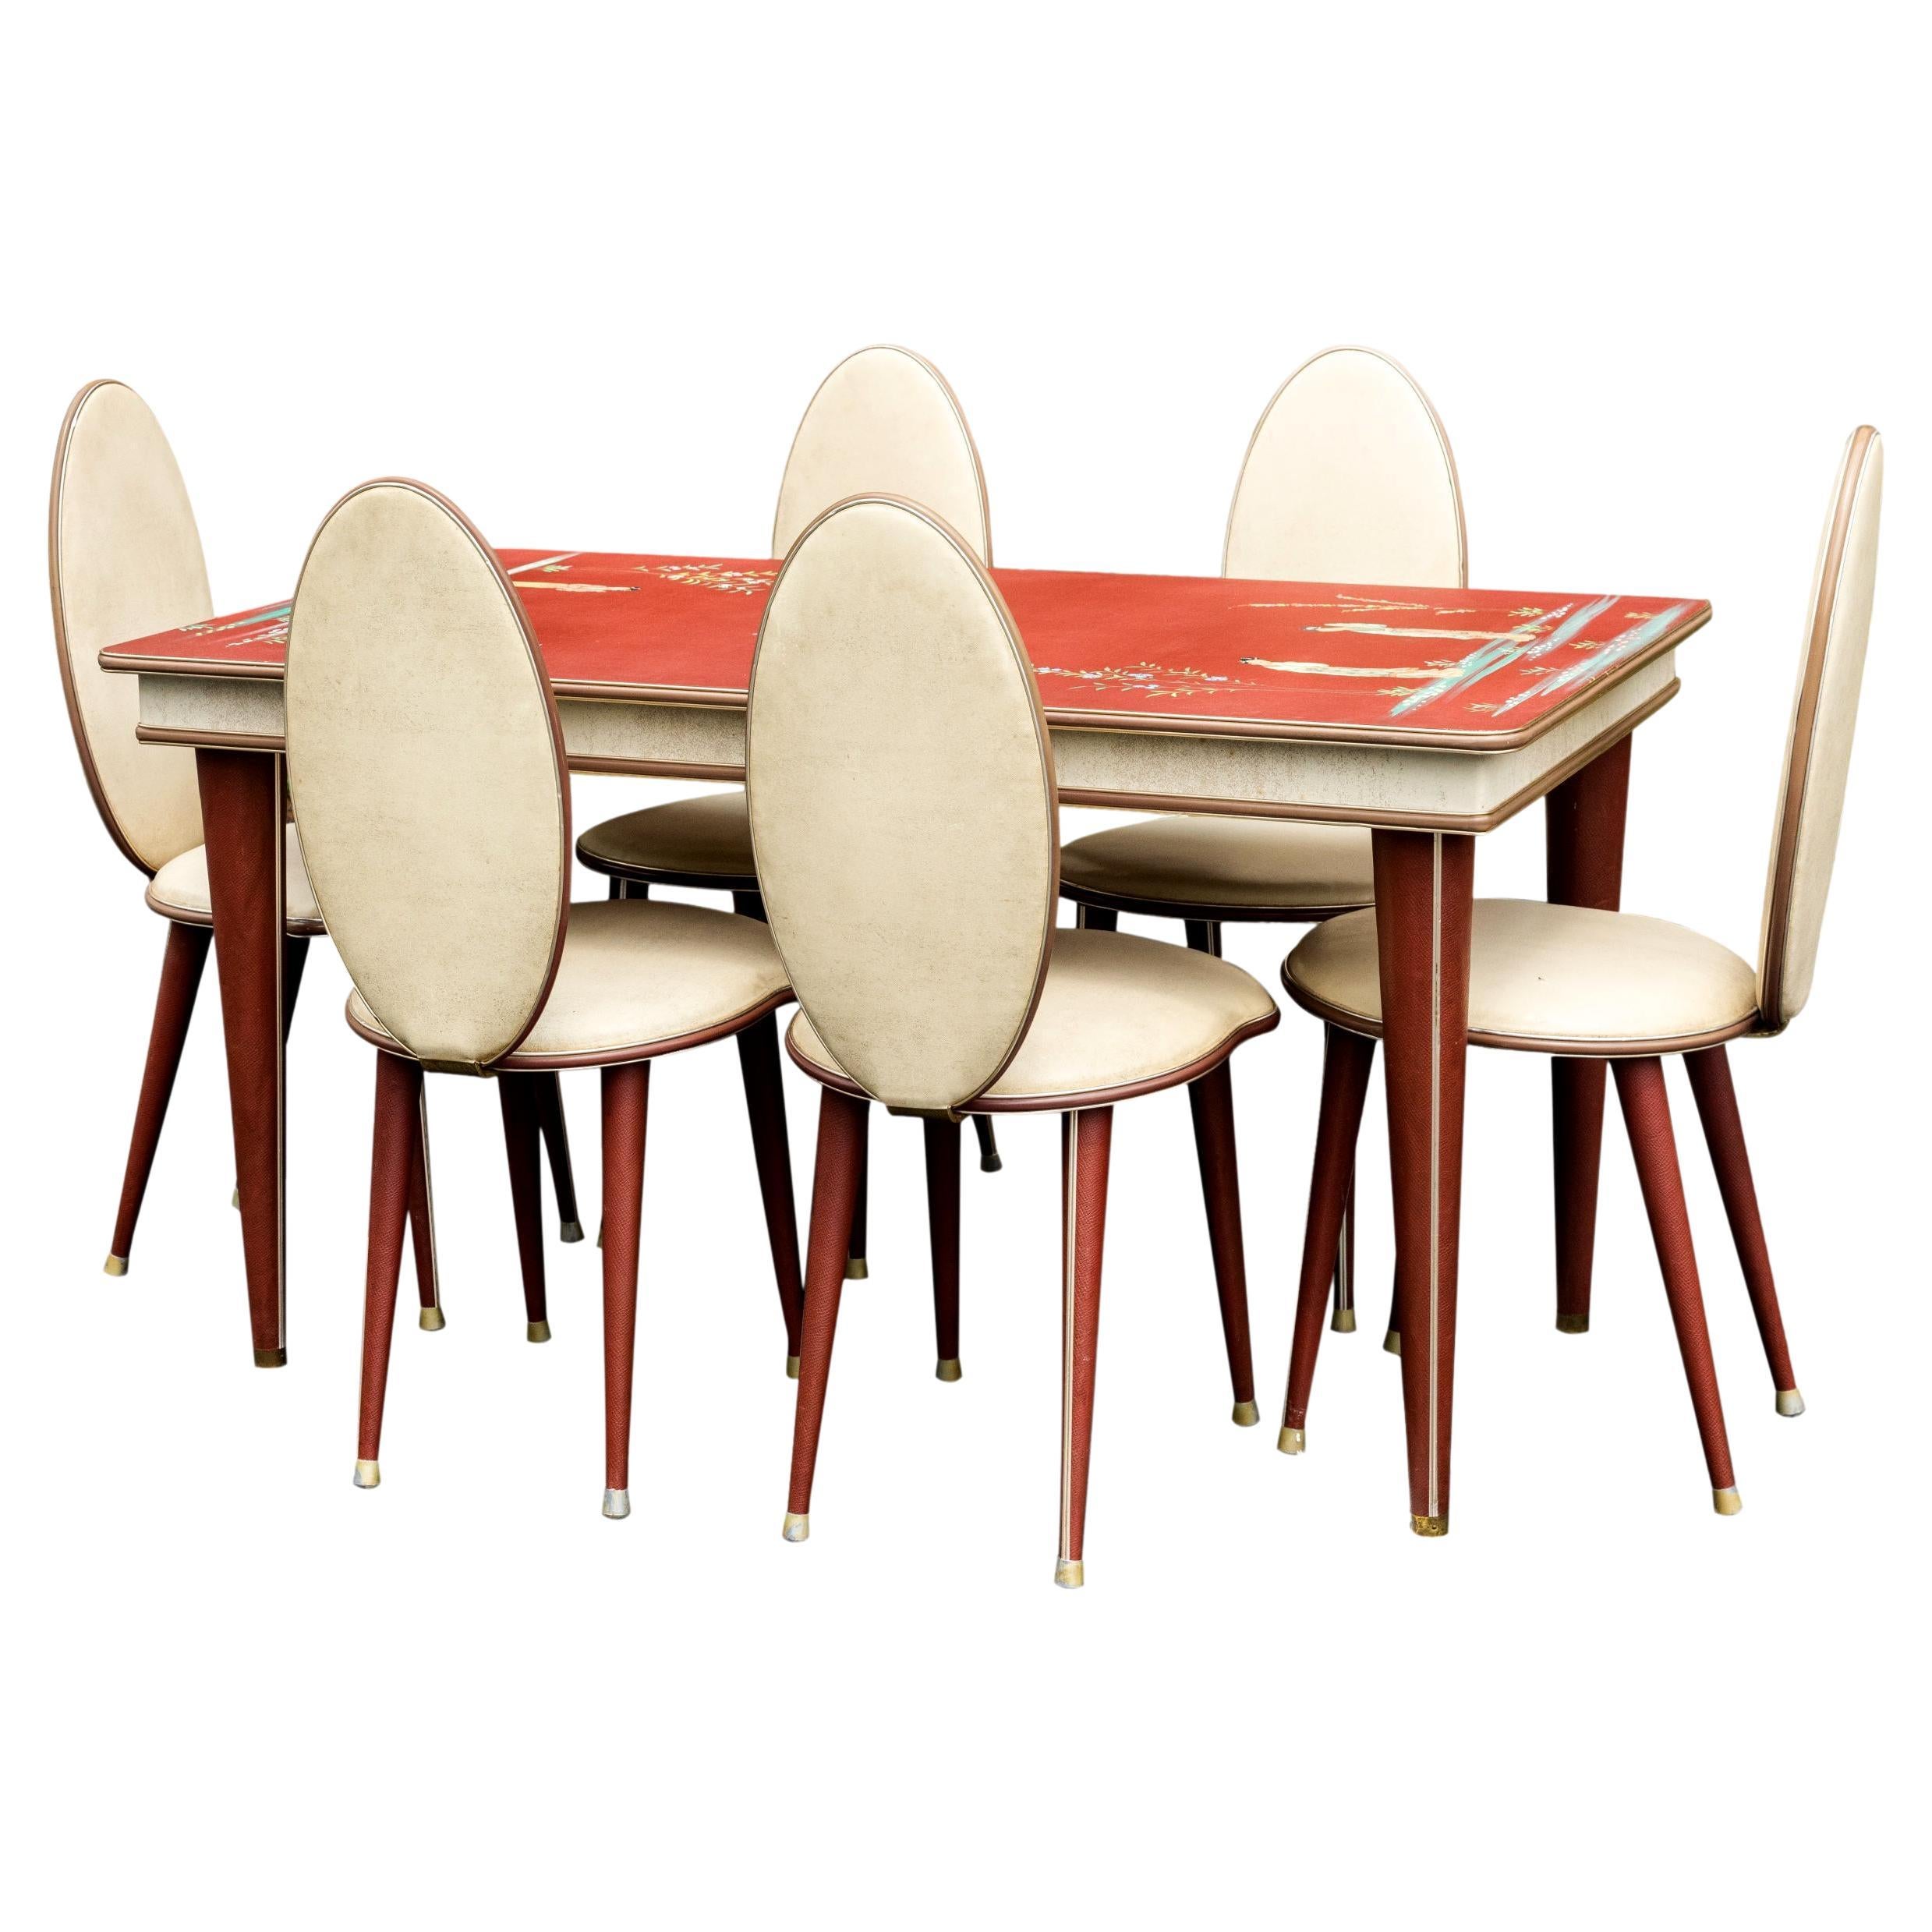 Mid-Century Modern Dining Table & Six Chairs by Umberto Mascagni, Italian, 1950 For Sale